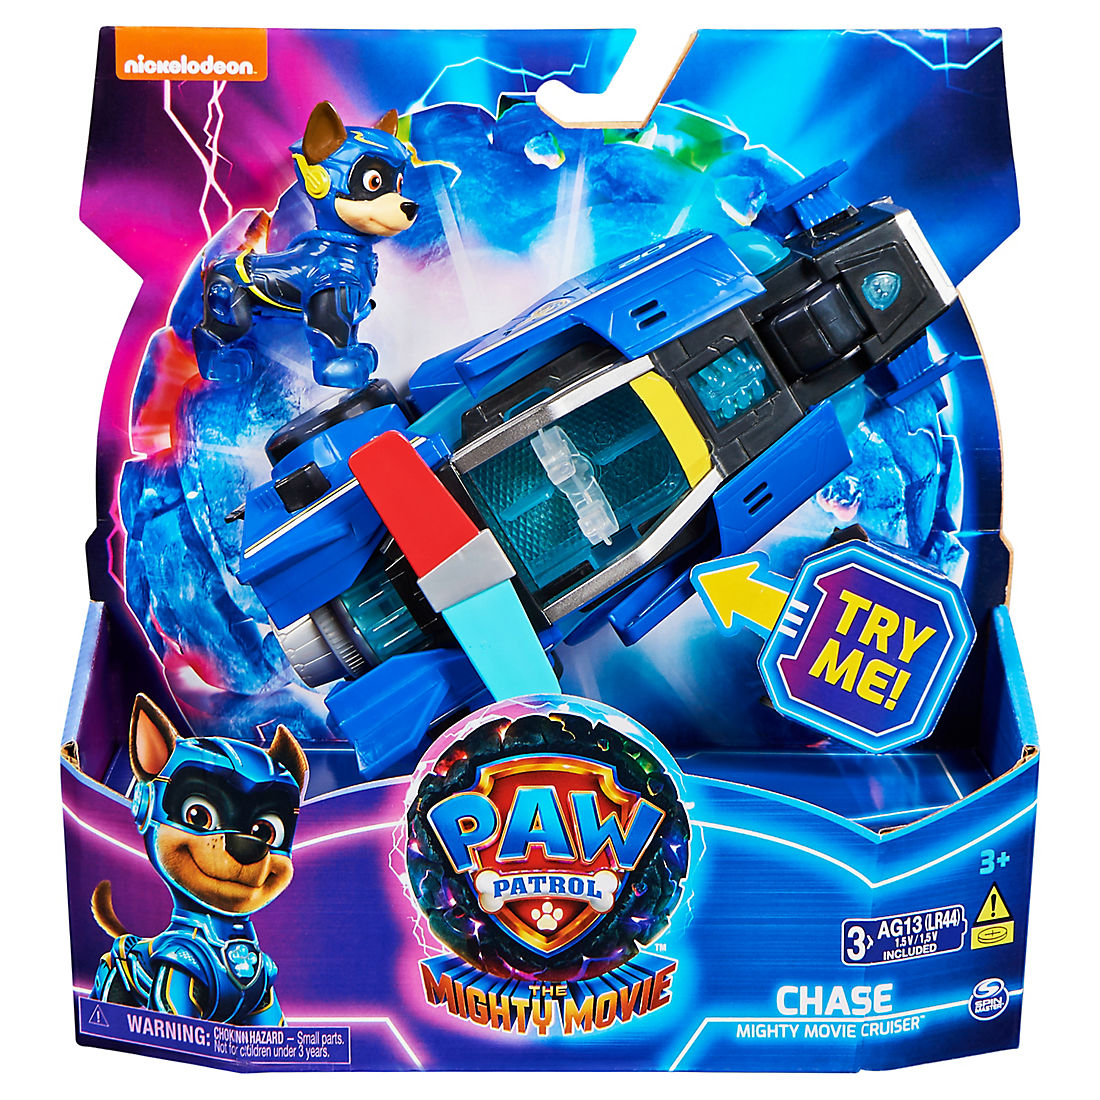 Paw Patrol The Mighty Toy